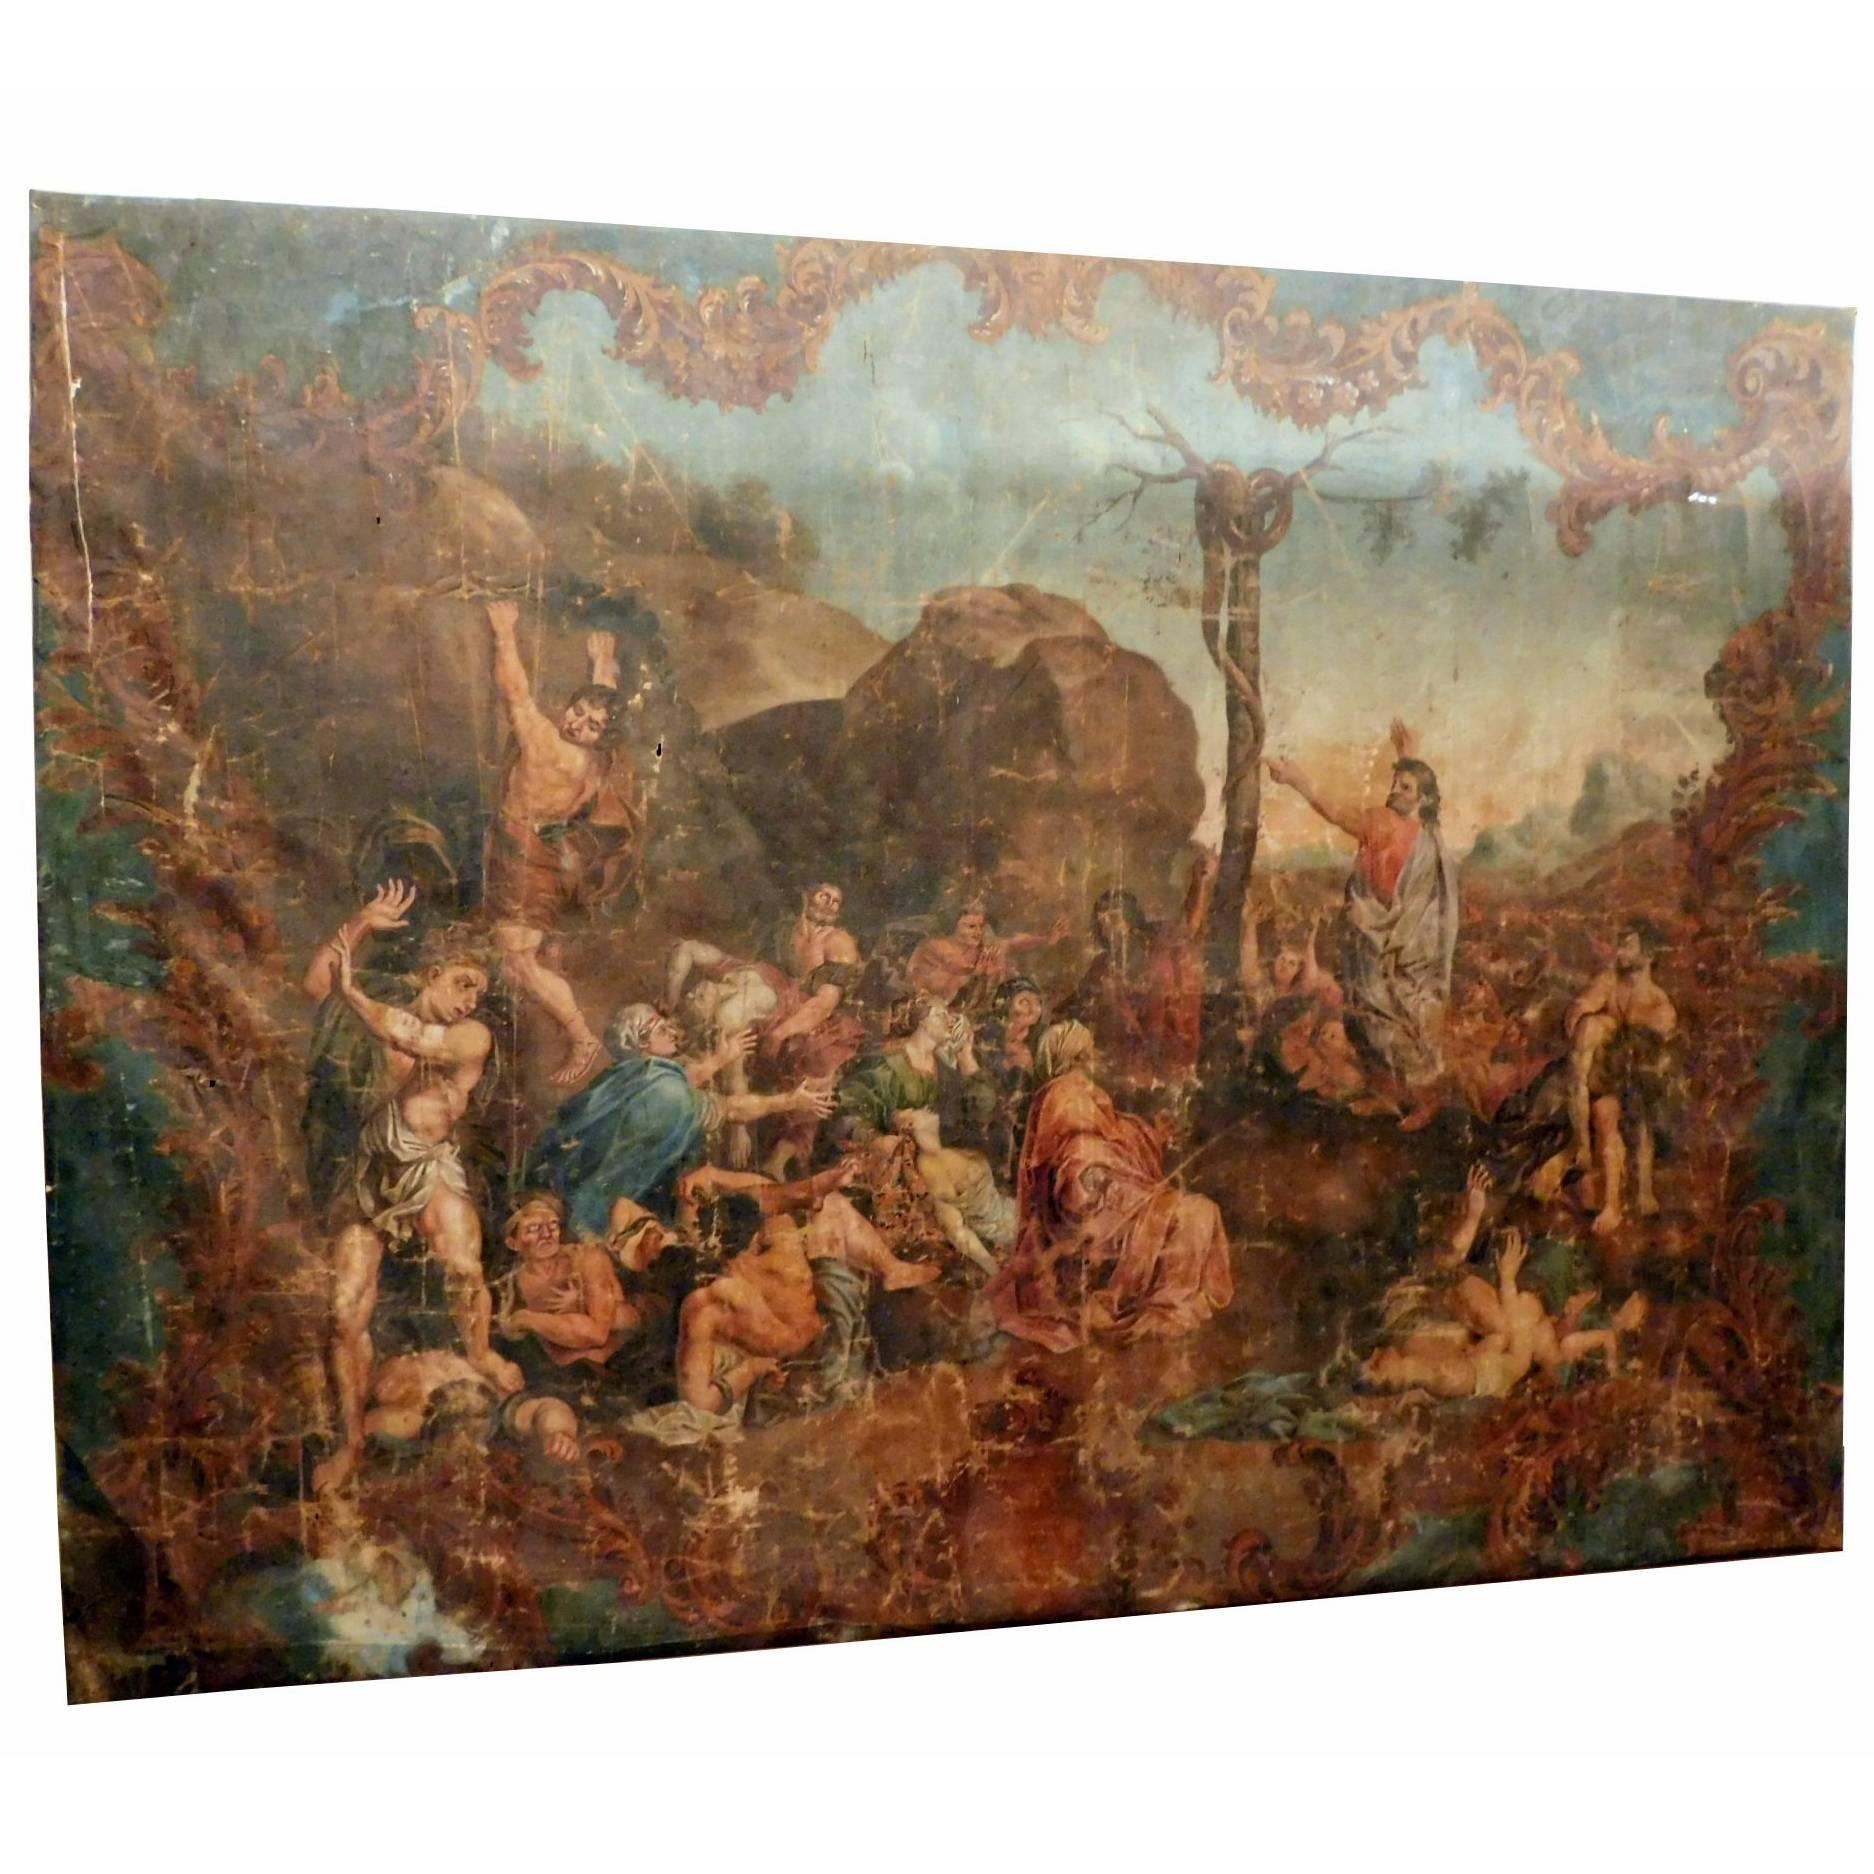 Antique Oil on Canvas with Biblical Scene